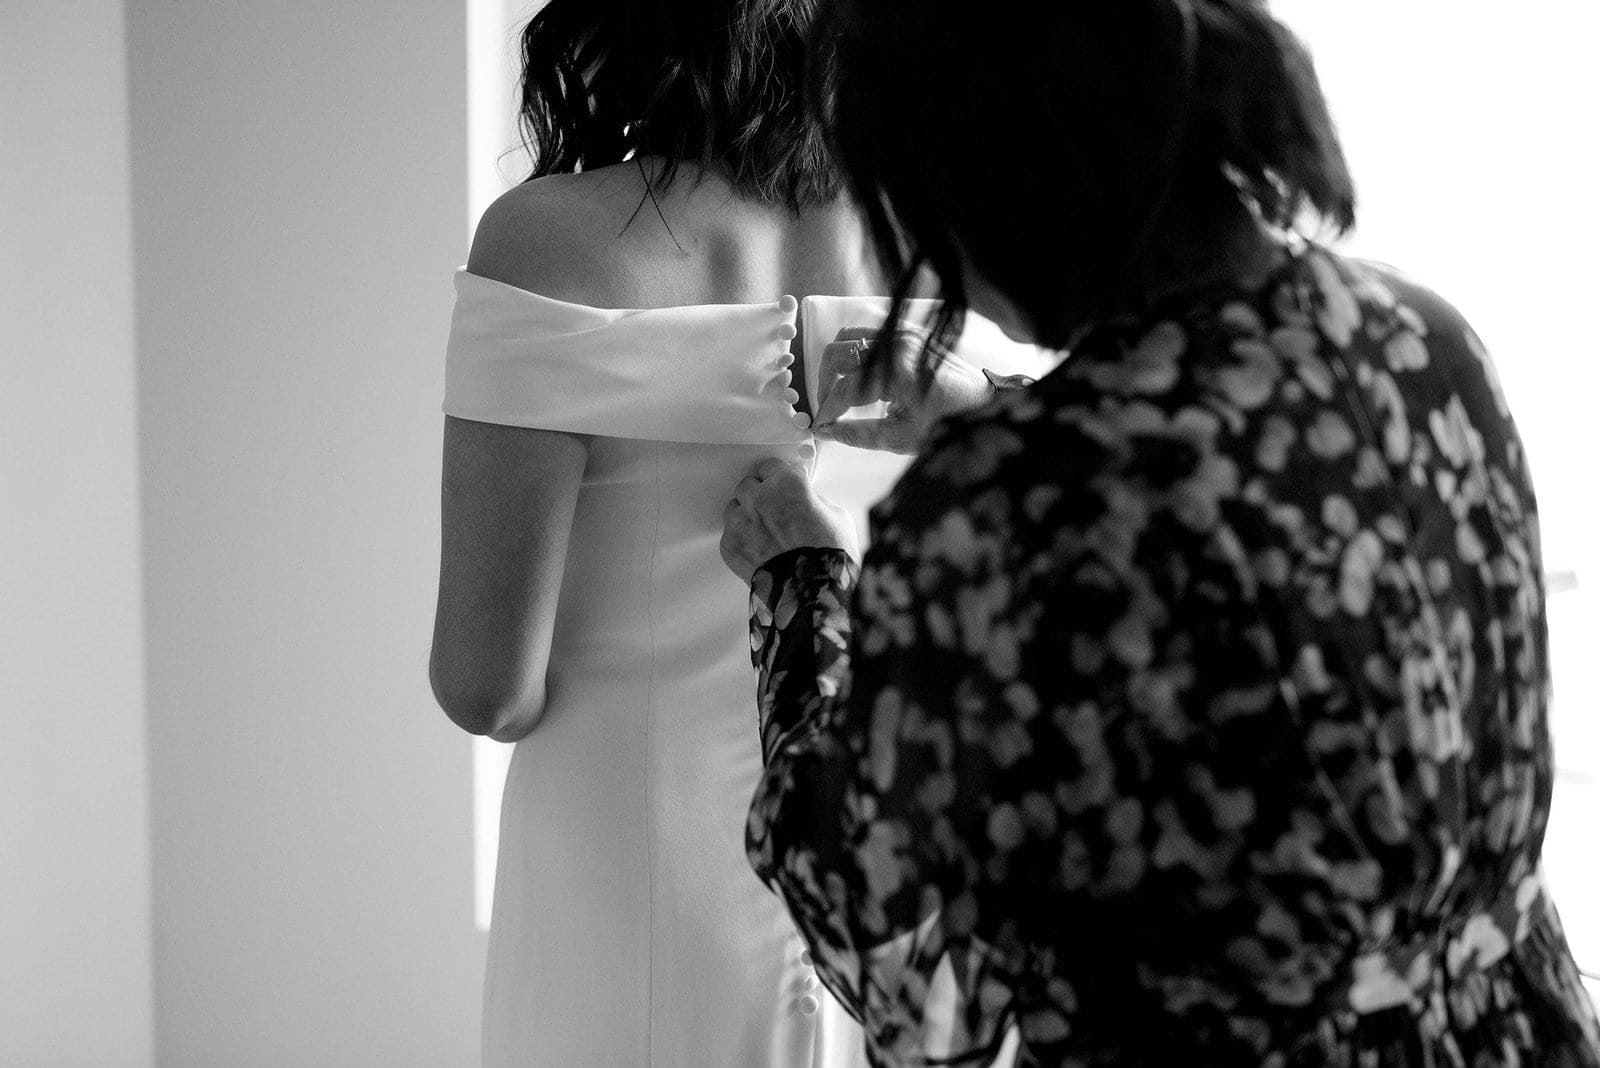 bride getting ready slips into wedding dress with mother mom emotional candid downtown toronto wedding photographer gardiner museum minimalist chic Jacqueline James Photography